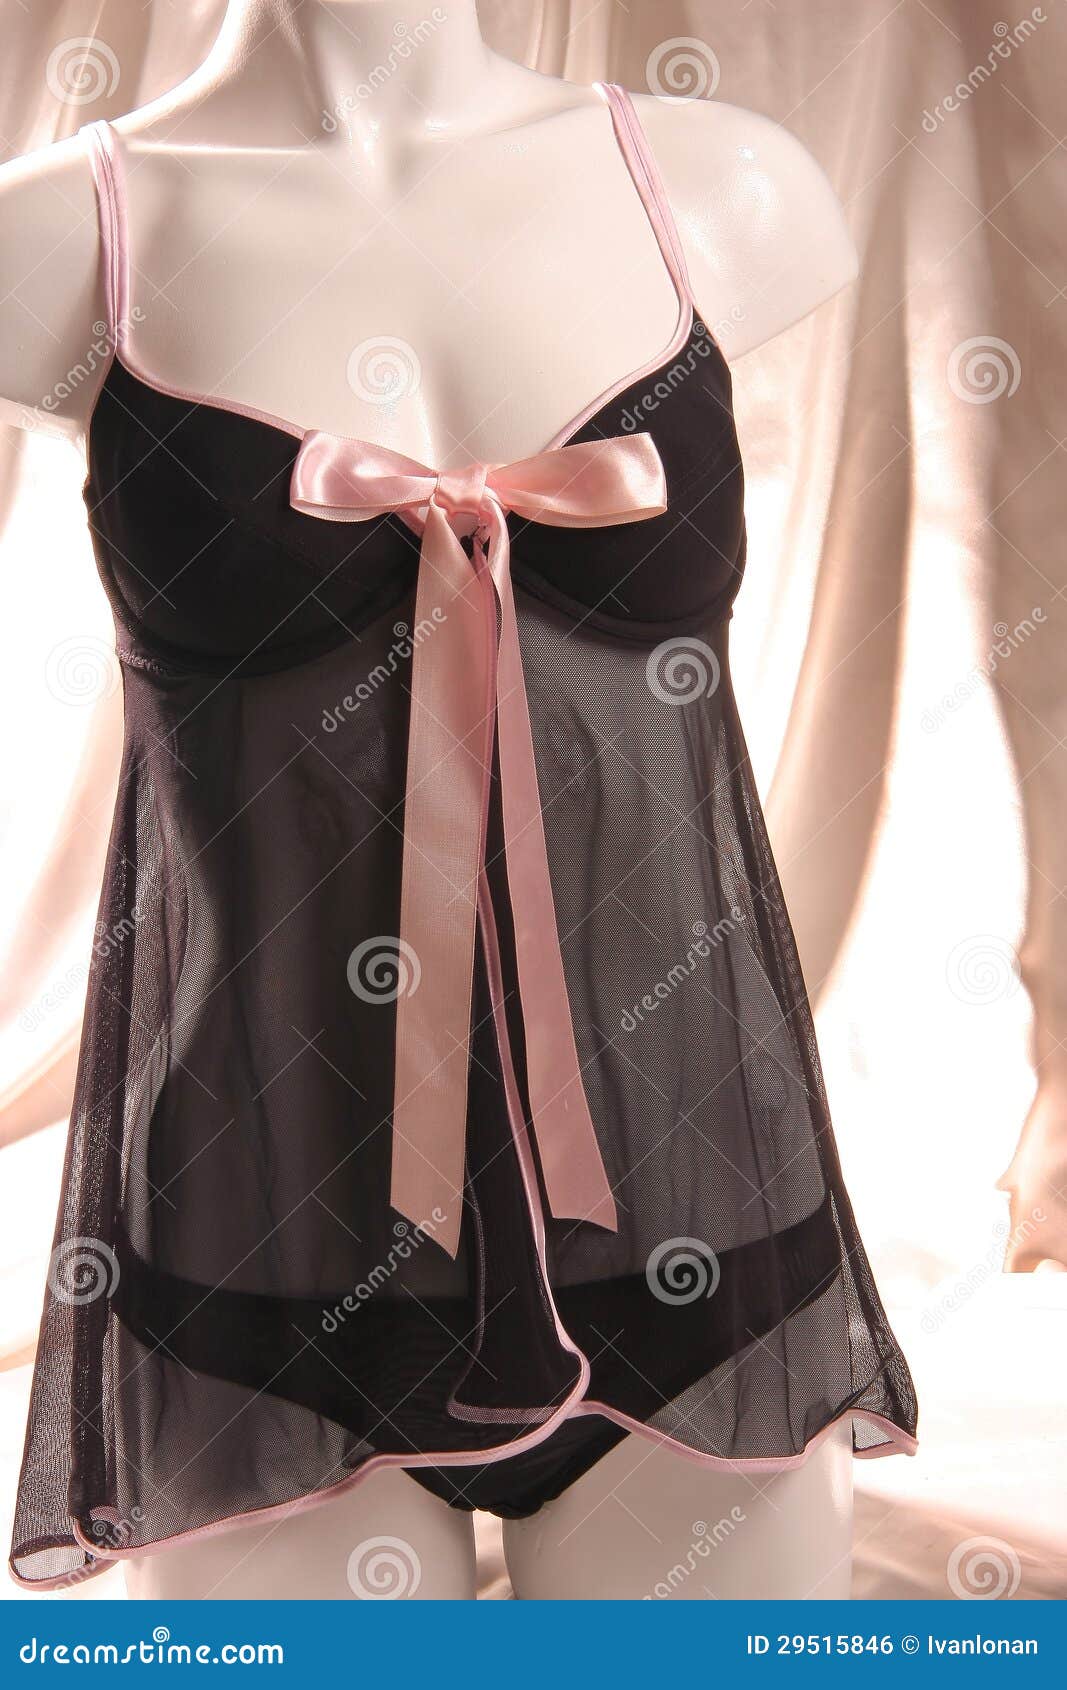 Mannequin with Lingerie stock photo. Image of model, honeysuckle - 29515846